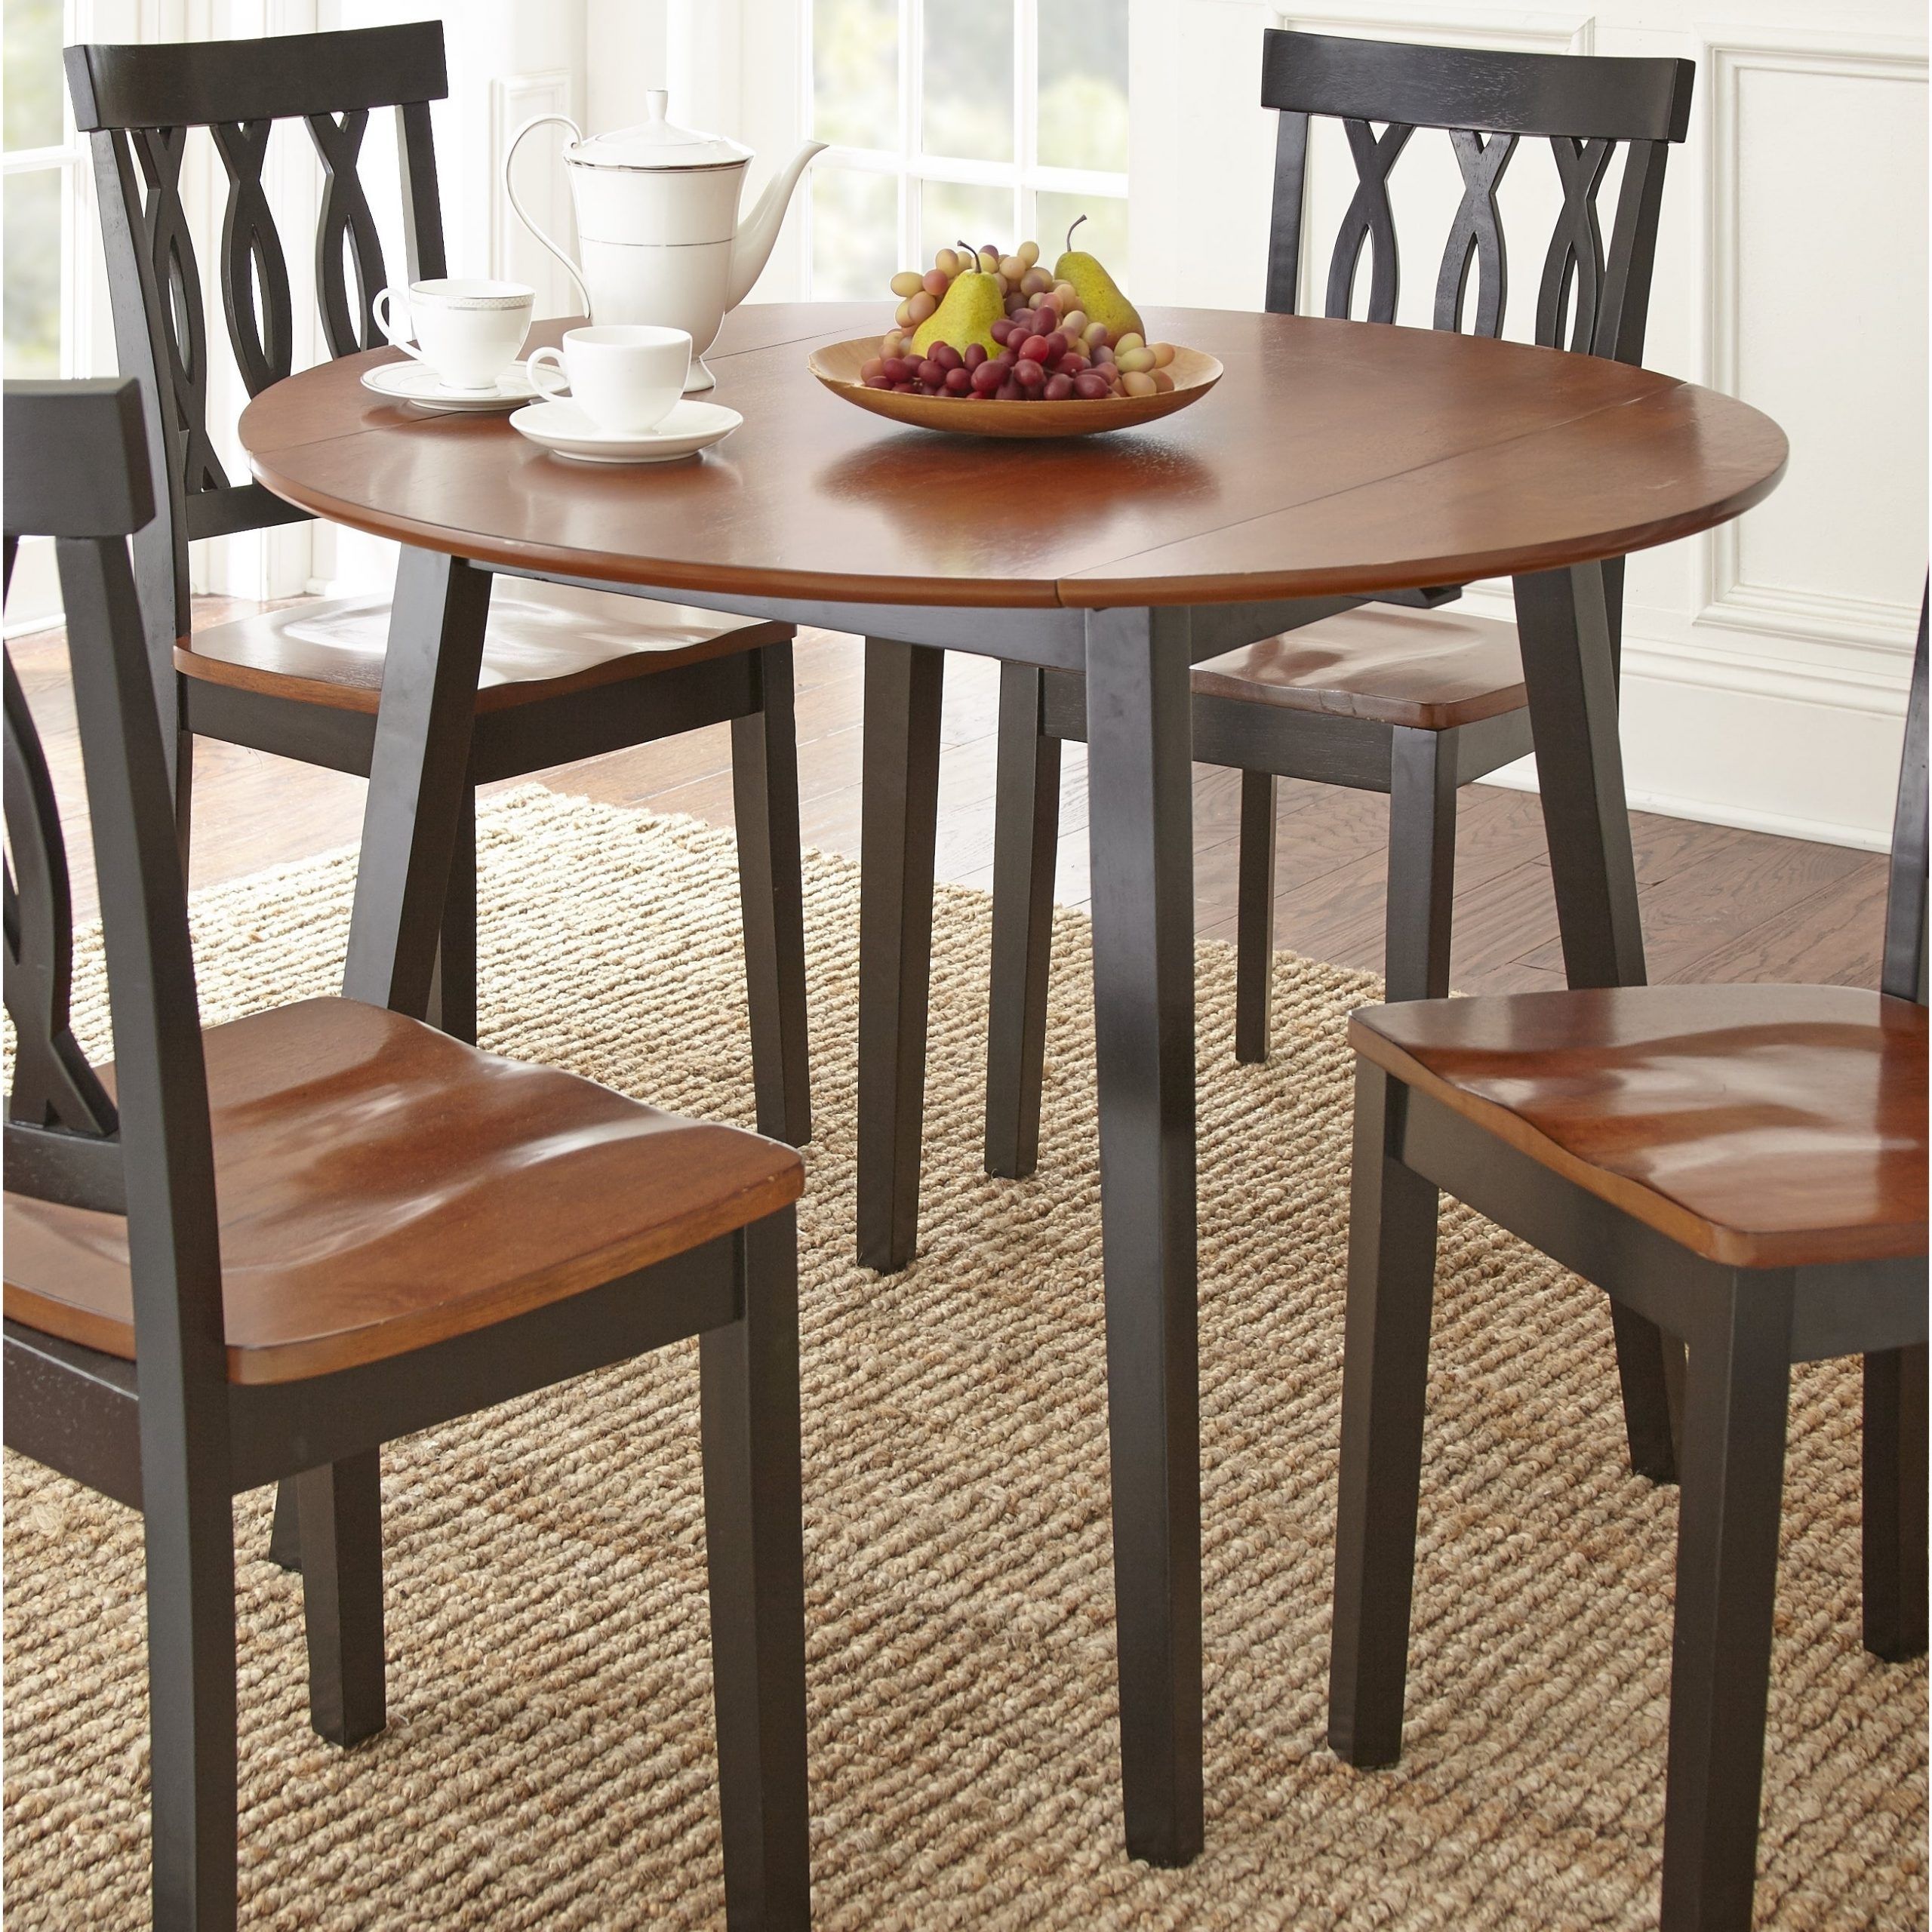 Favorite Greyson Living Abbey Drop Leaf Dining Table – Black Cherry Finish Throughout Transitional 4 Seating Double Drop Leaf Casual Dining Tables (View 29 of 30)